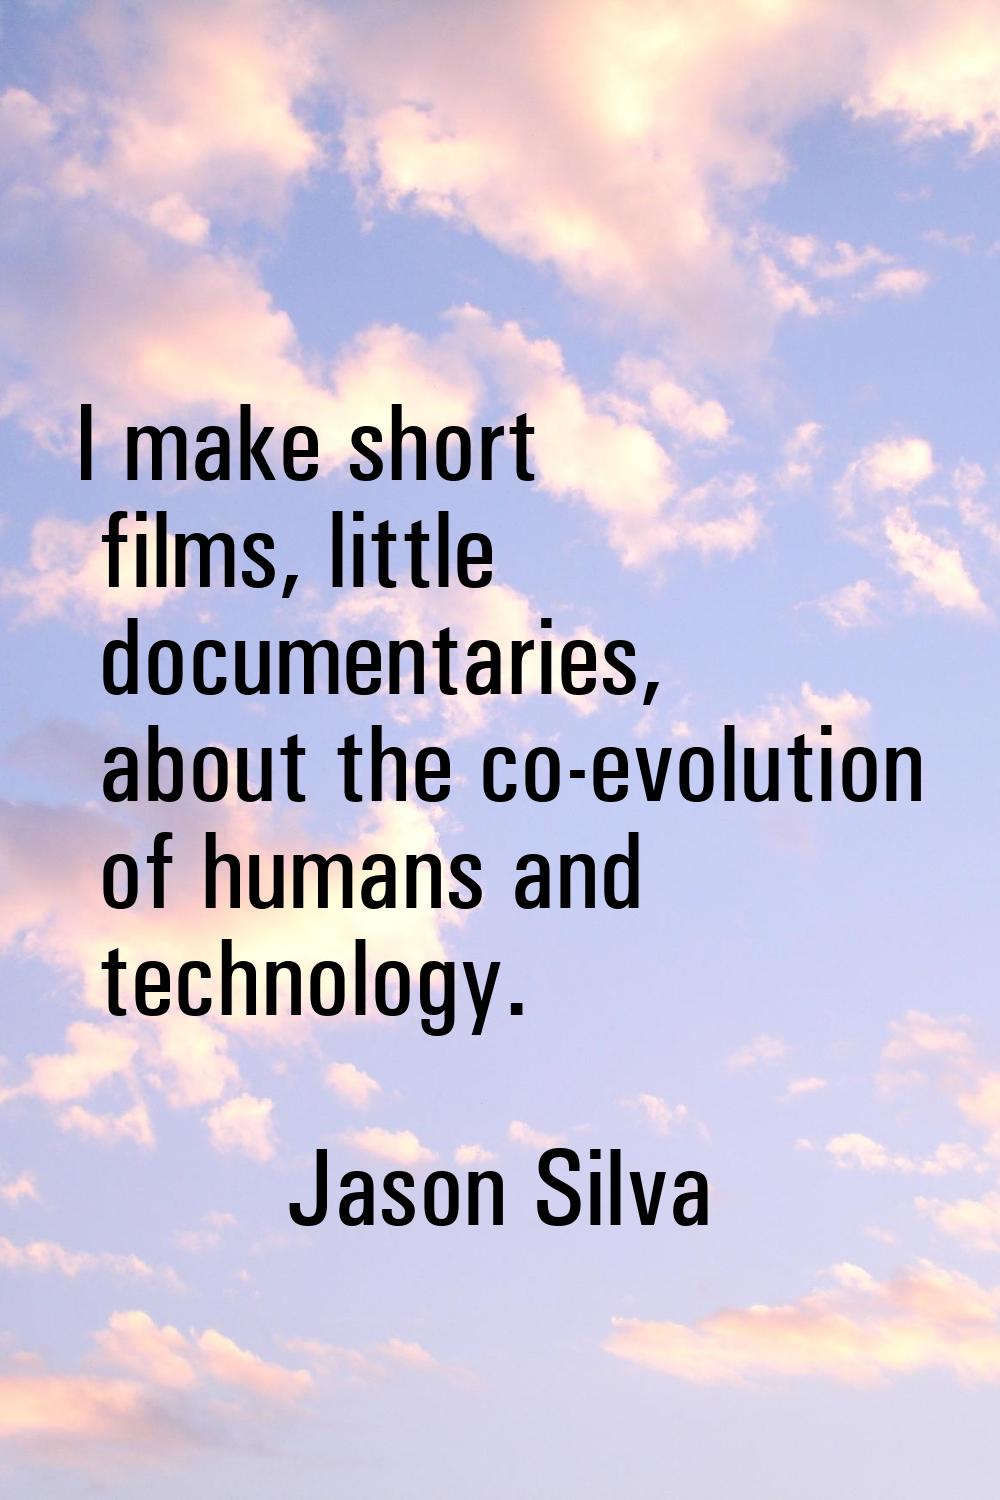 I make short films, little documentaries, about the co-evolution of humans and technology.